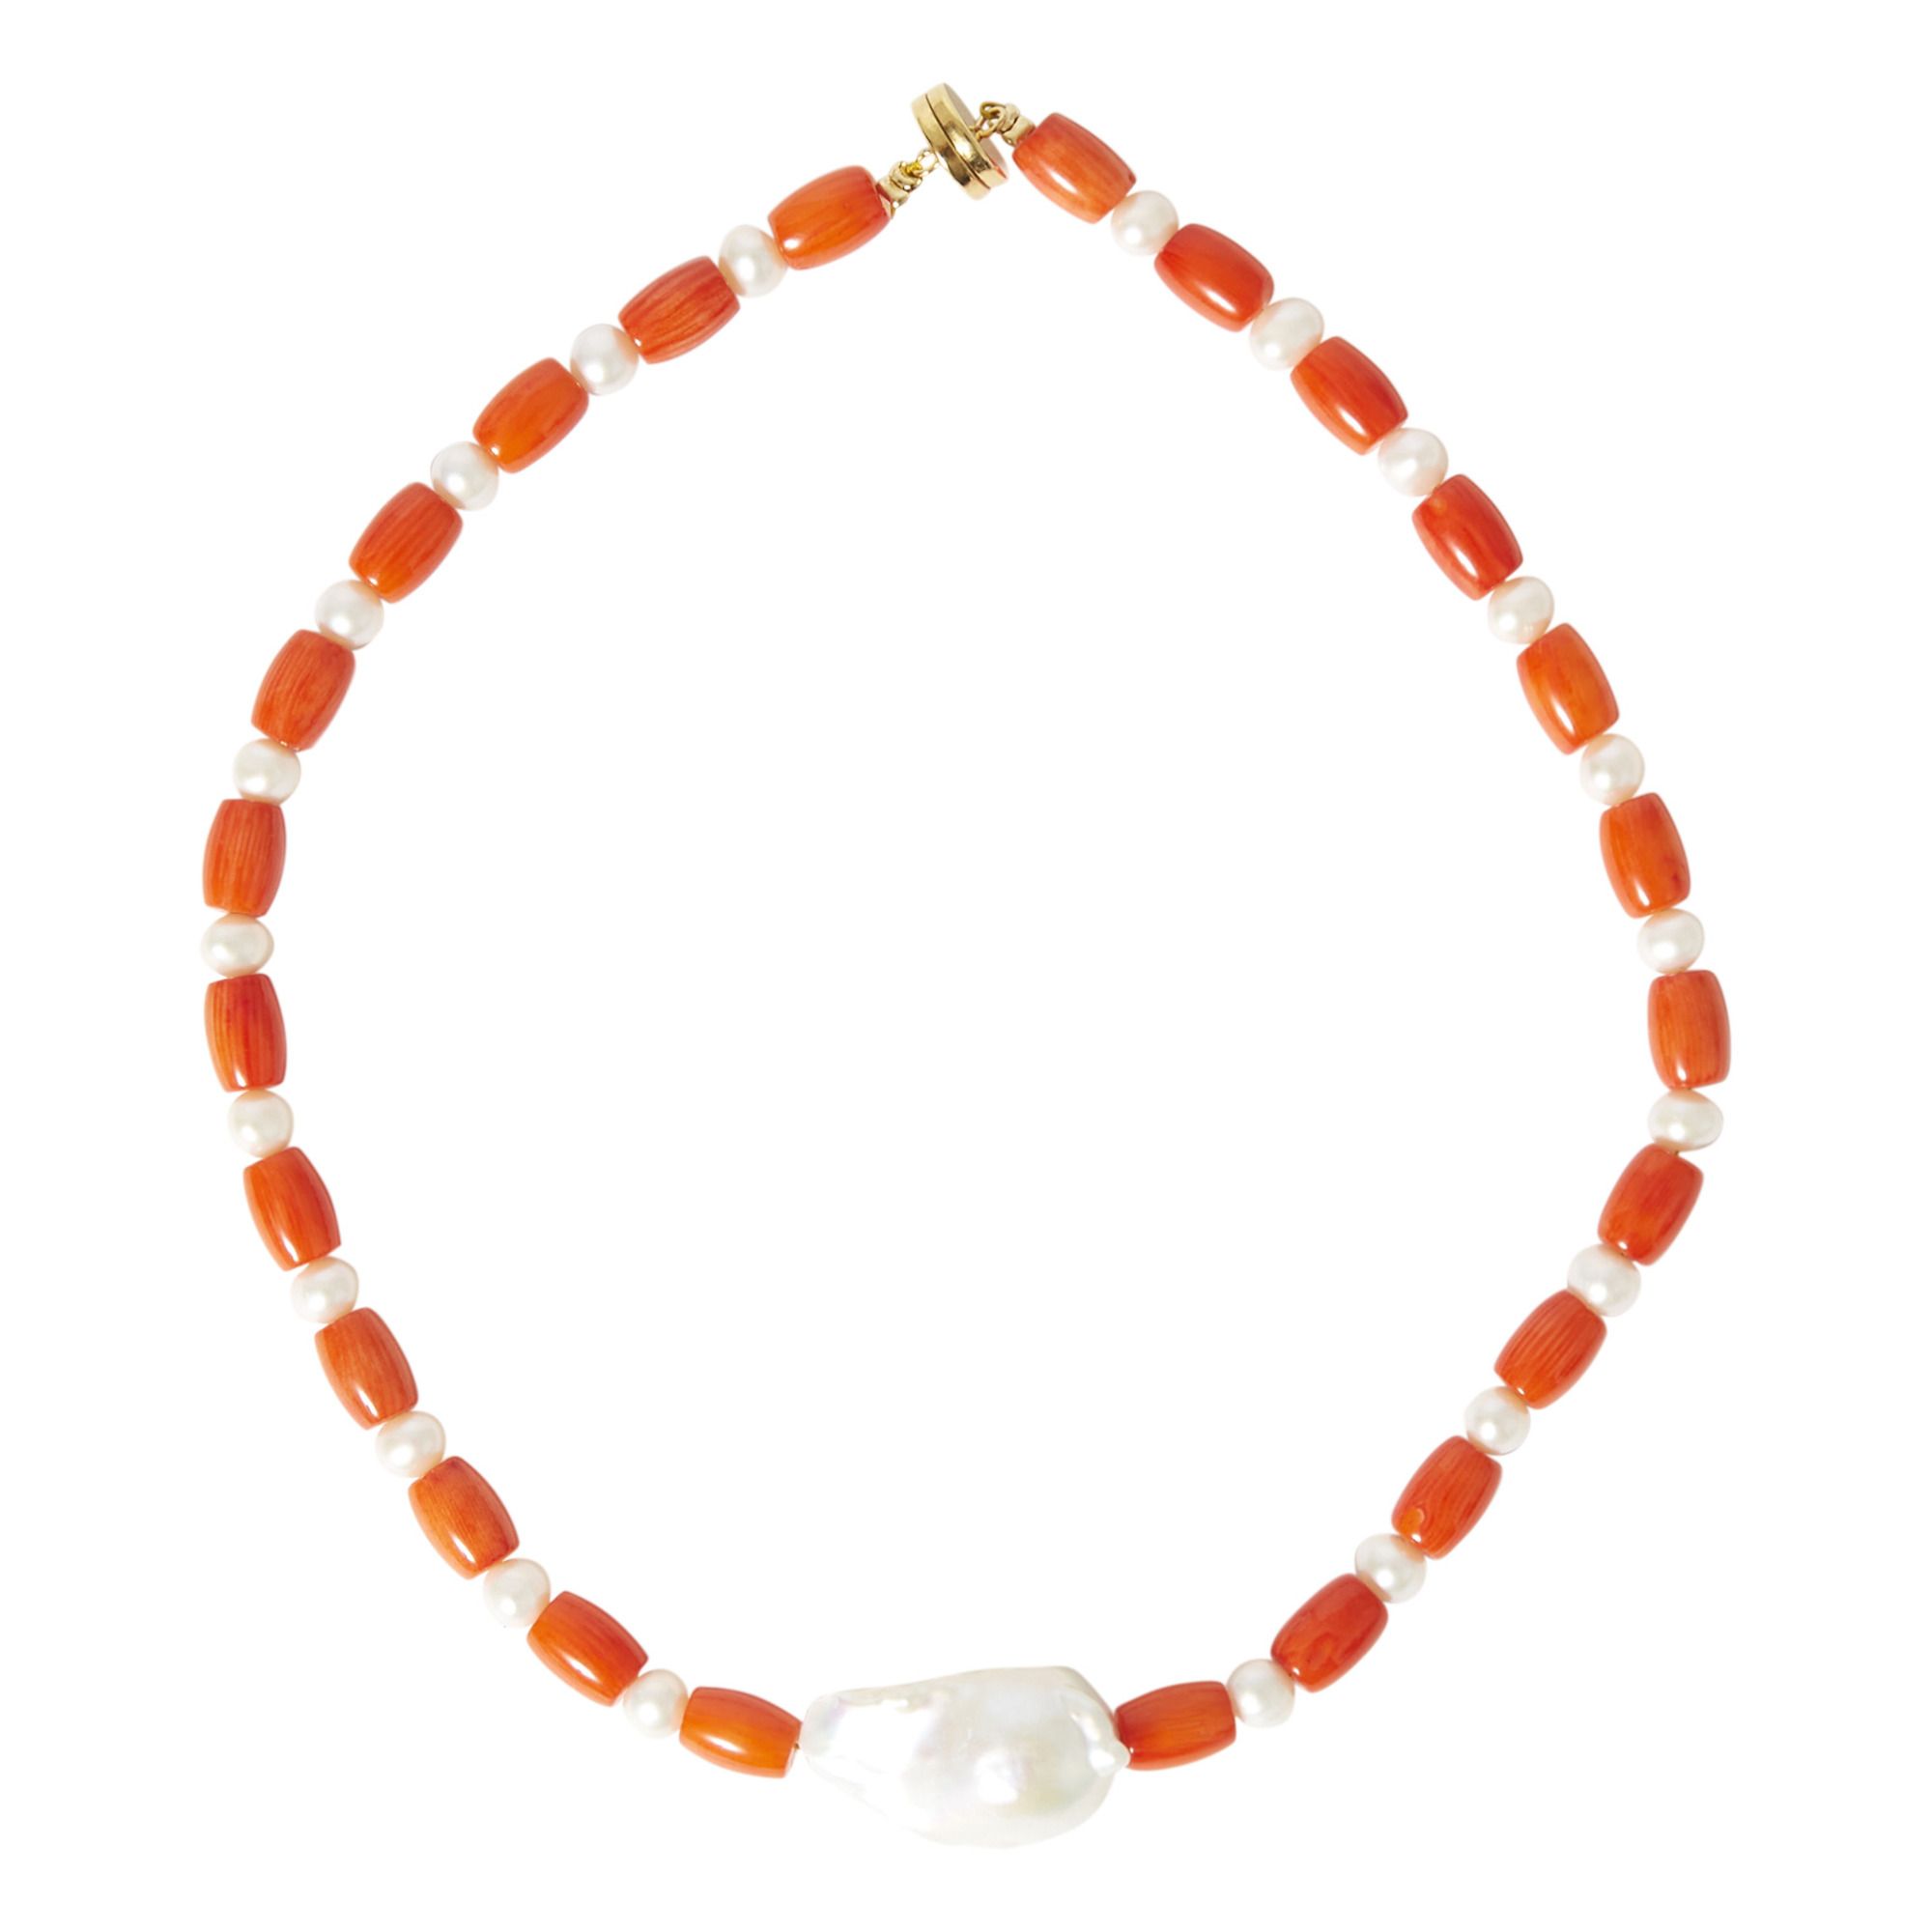 Timeless Pearly - Collier Perles Baroques Bicolores - Femme - Orange